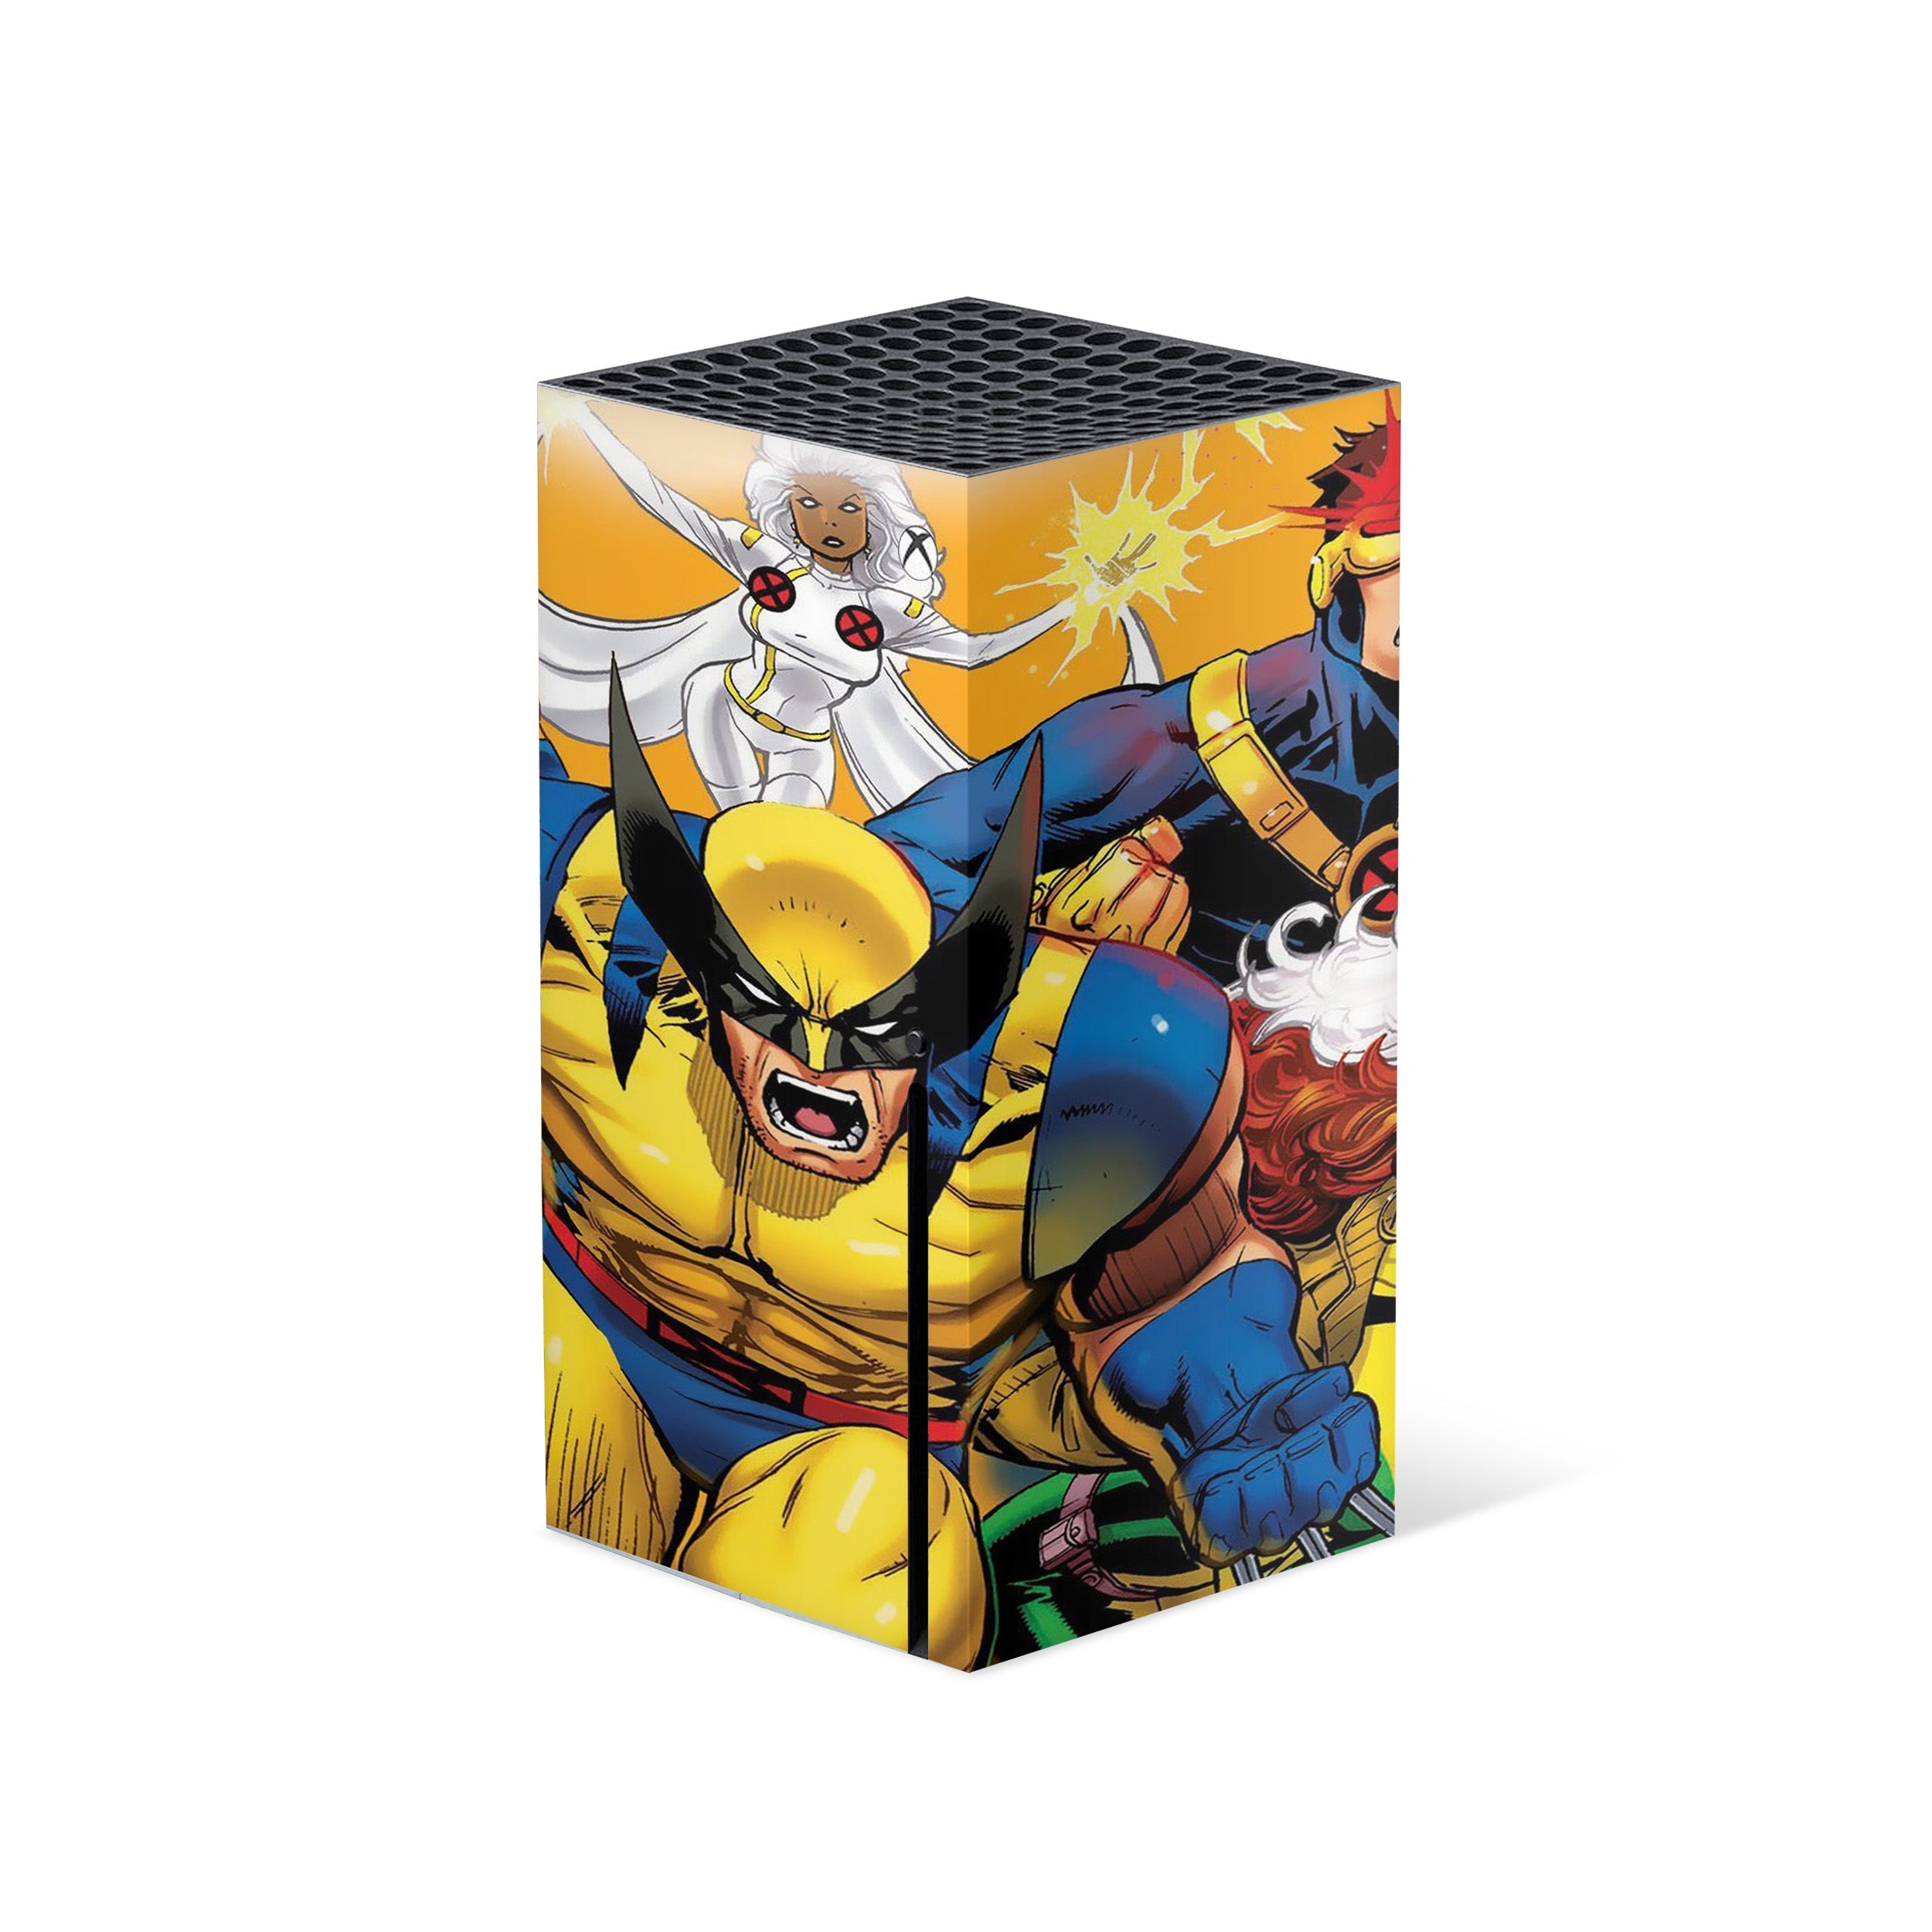 A video game skin featuring a Marvel X Men design for the Xbox Series X.